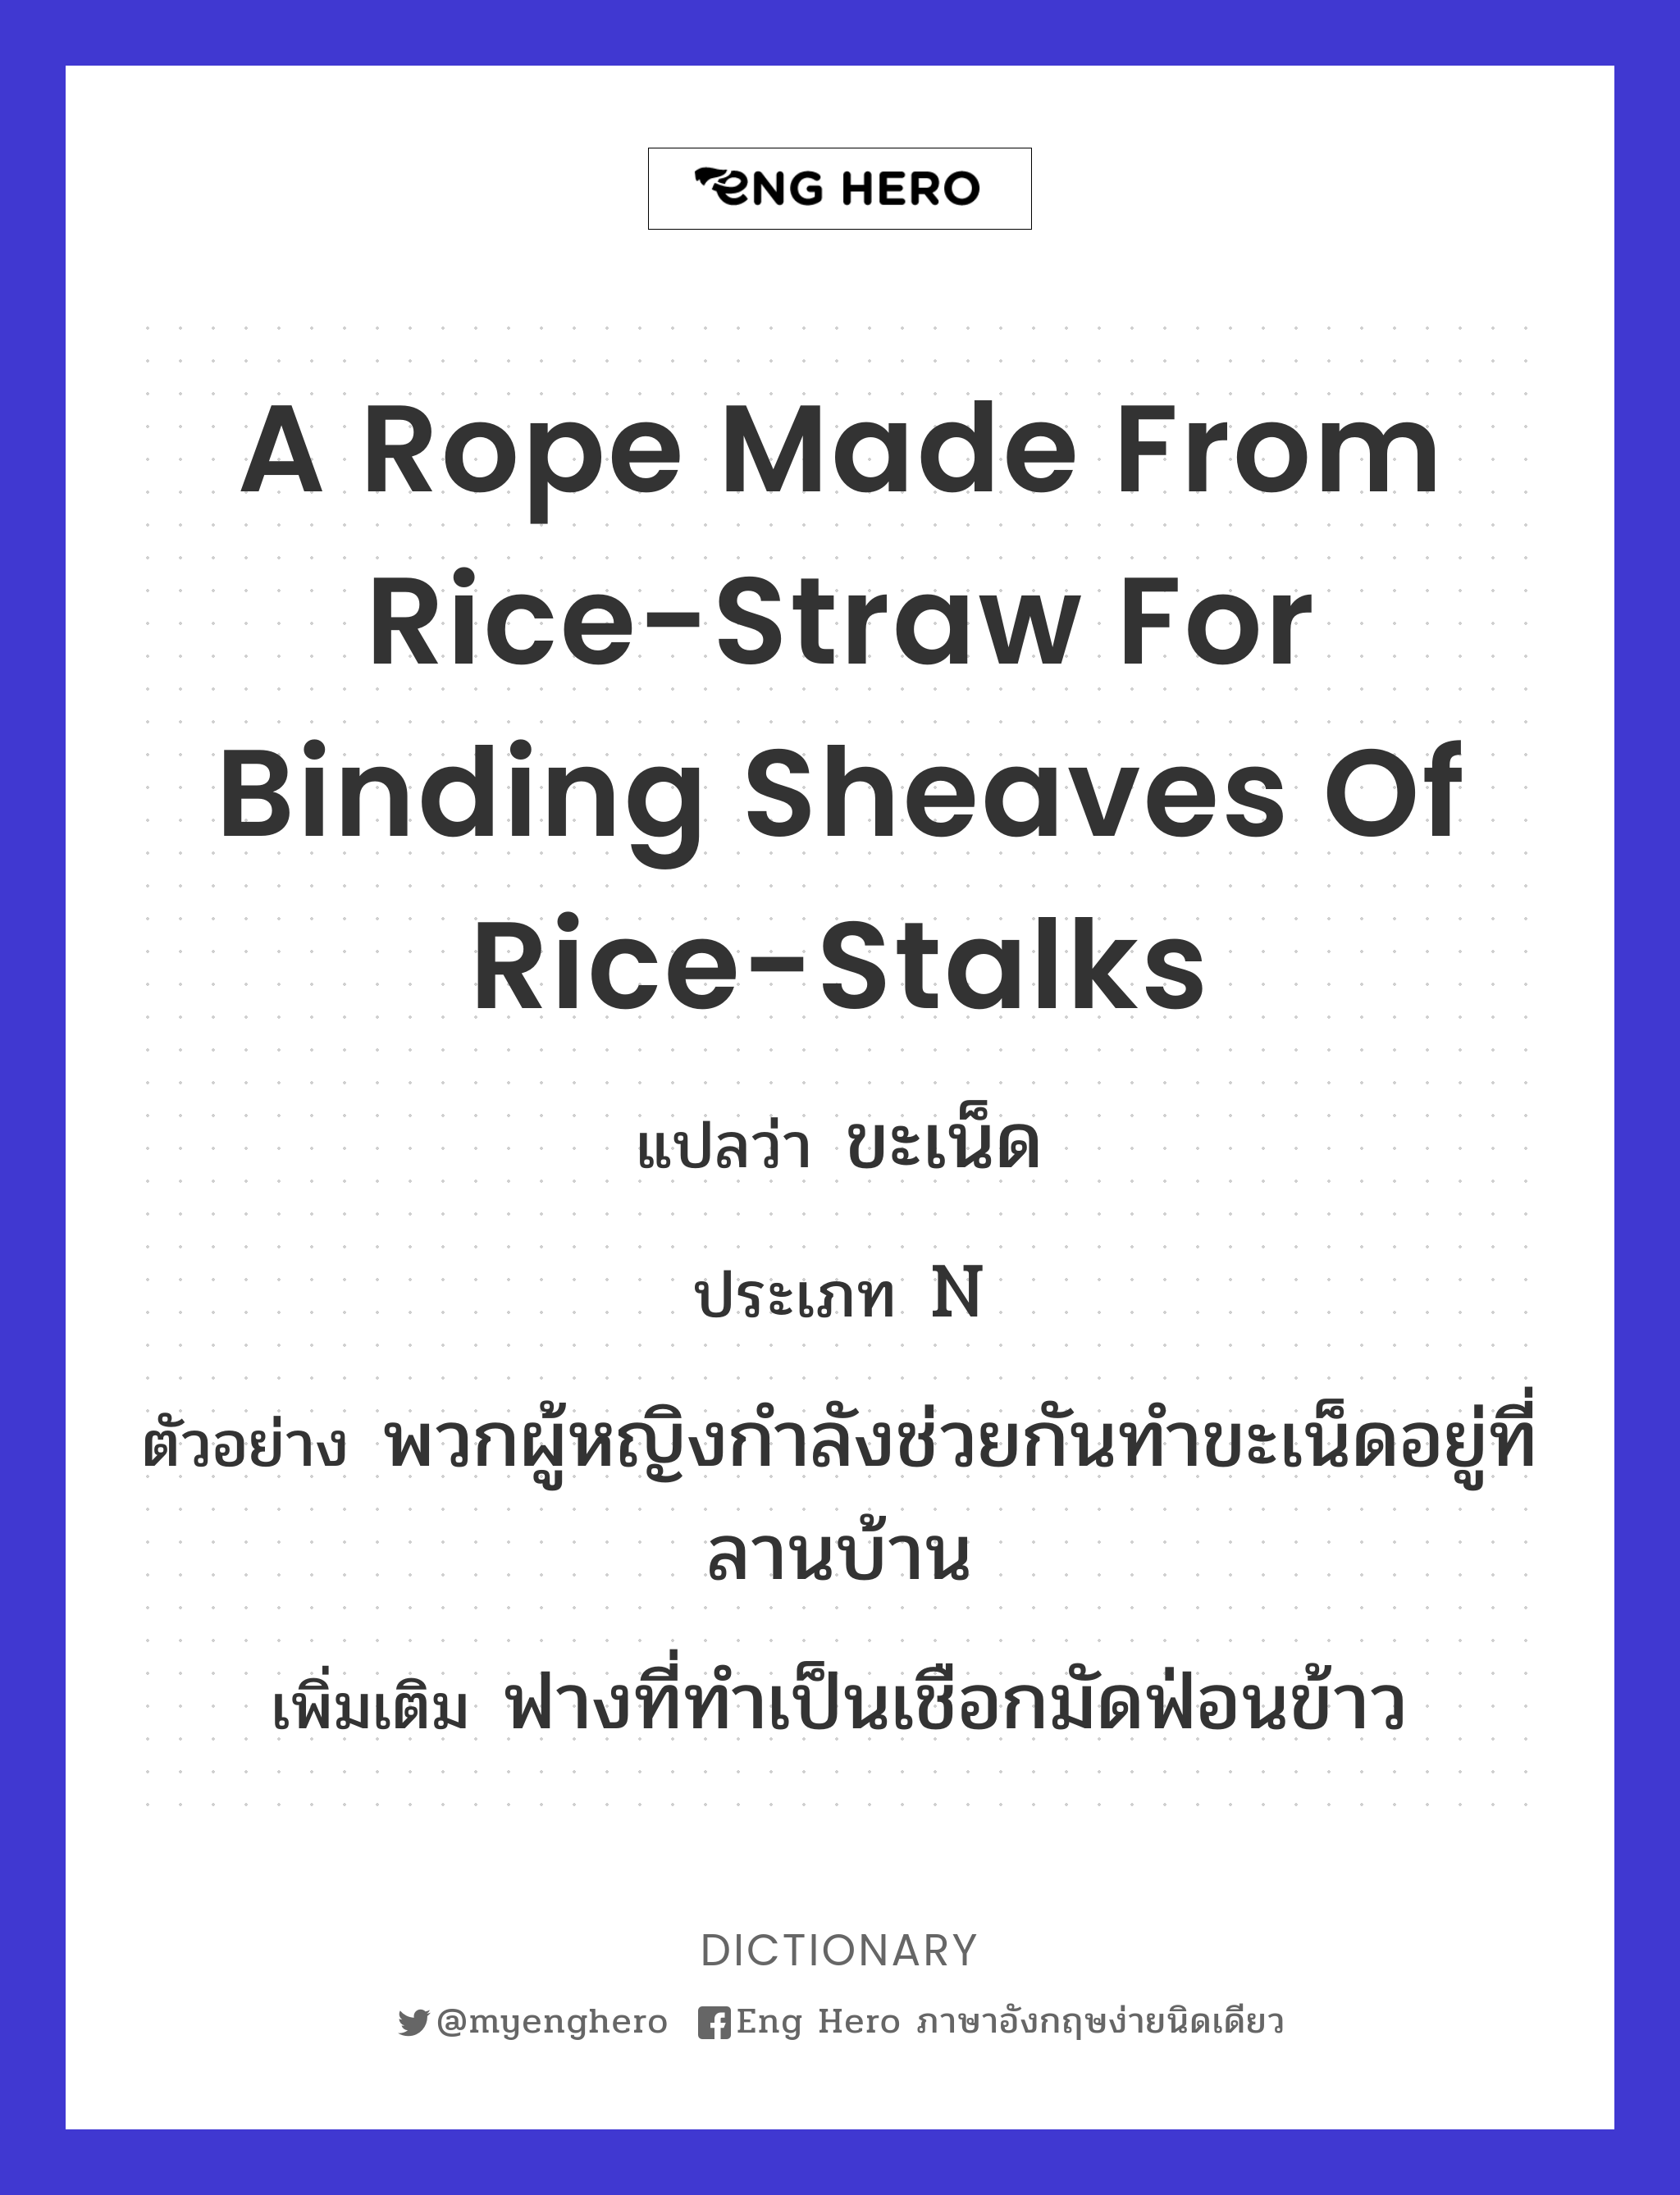 a rope made from rice-straw for binding sheaves of rice-stalks